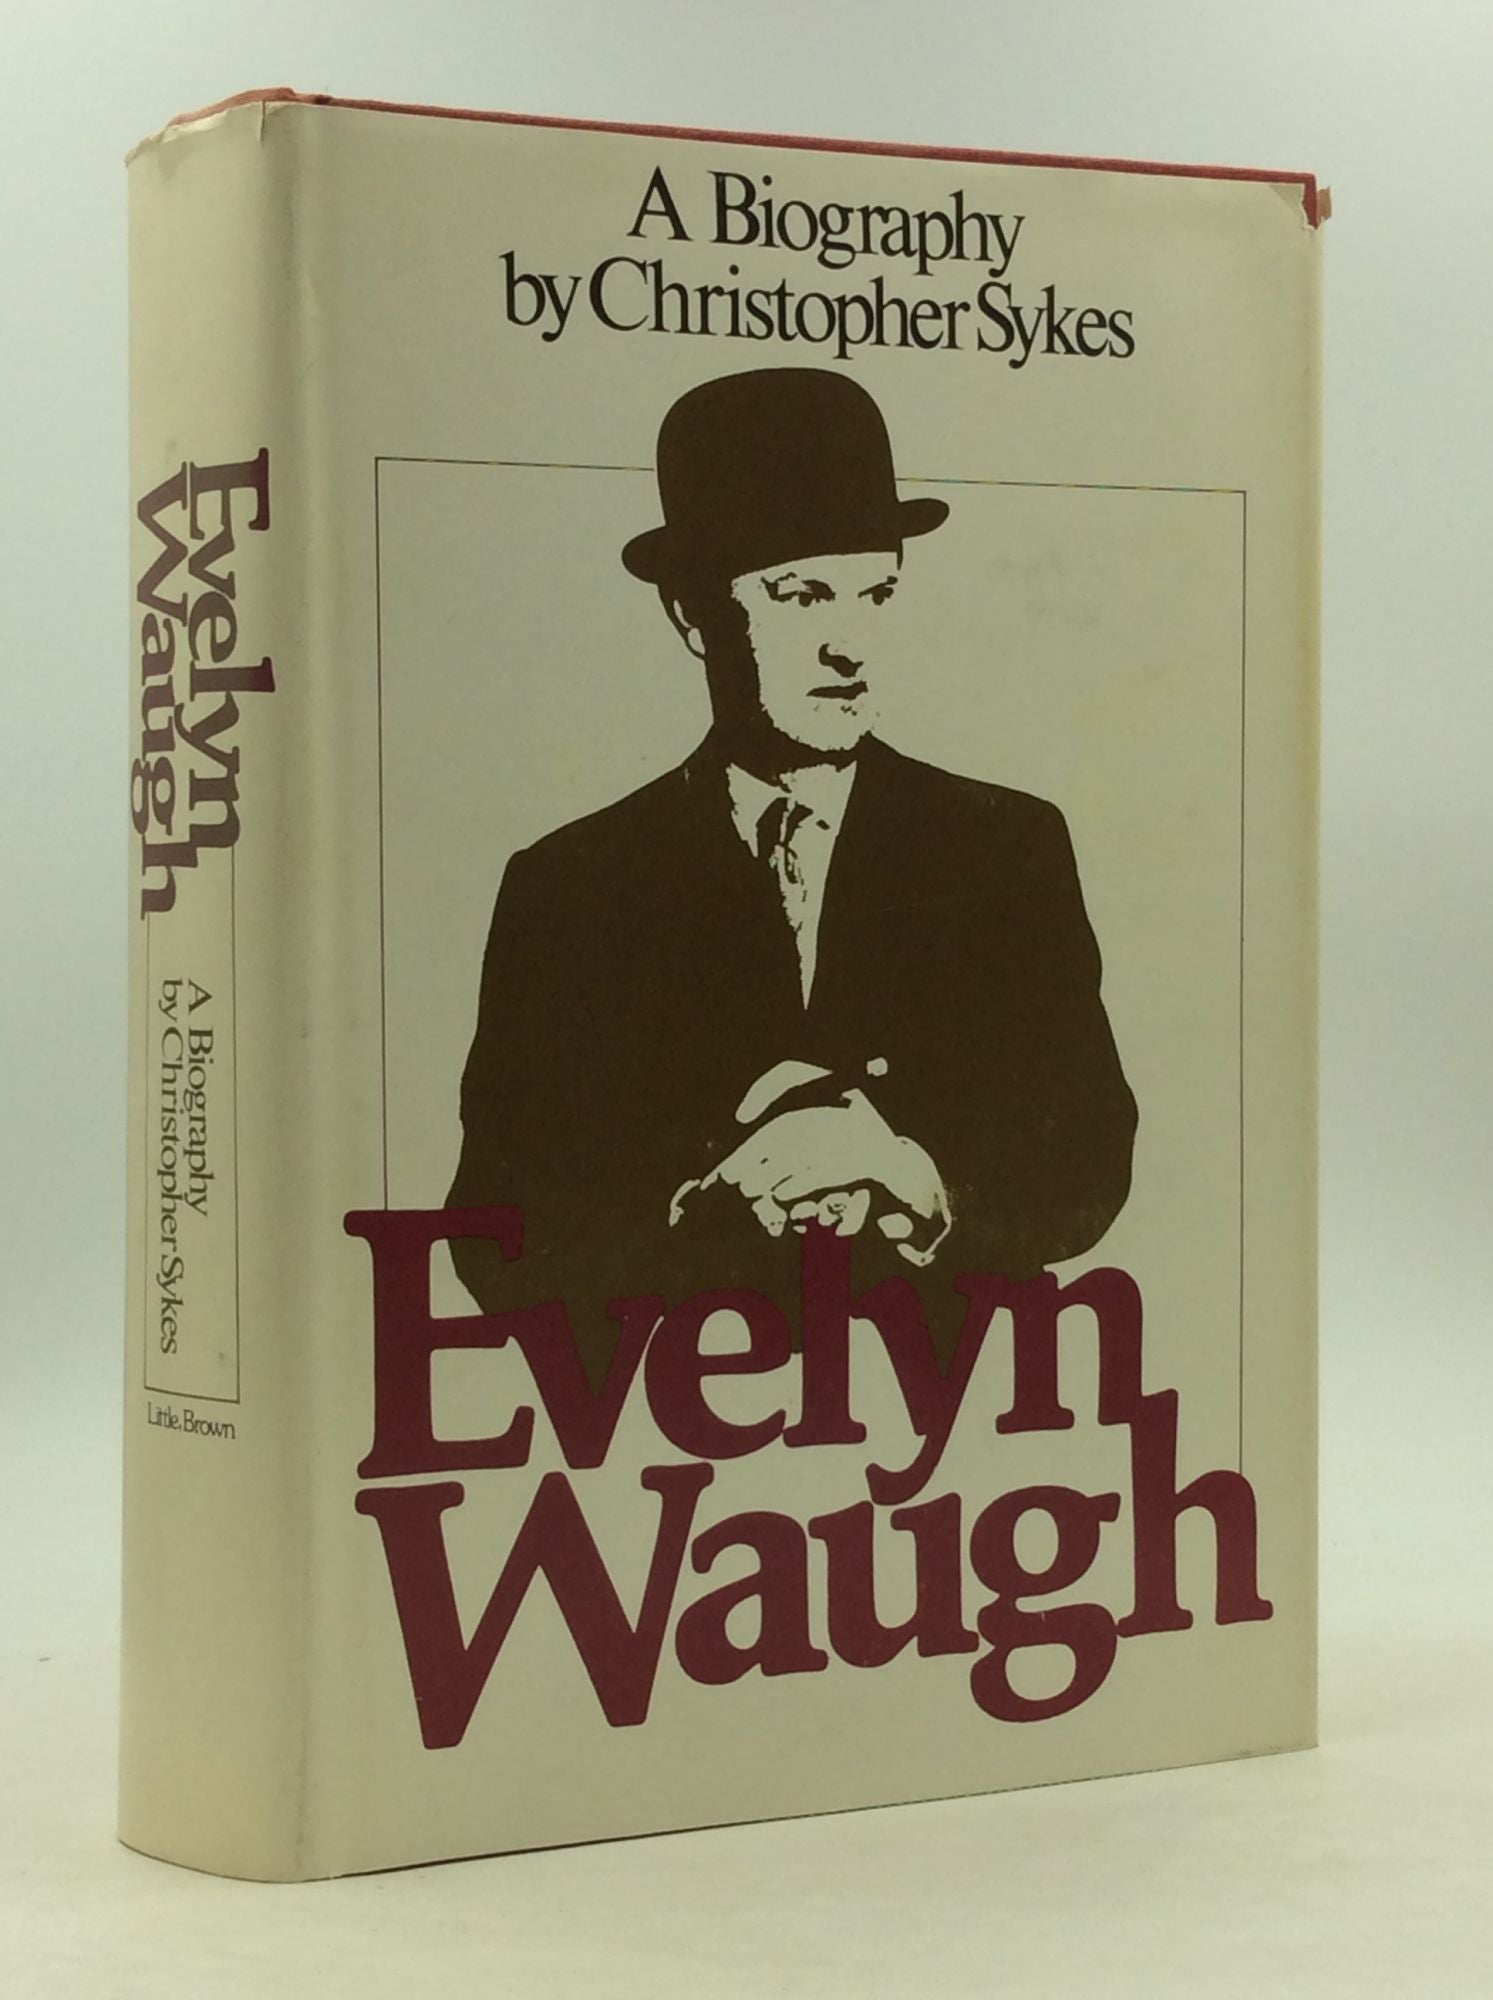 Christopher Sykes - Evelyn Waugh: A Biography